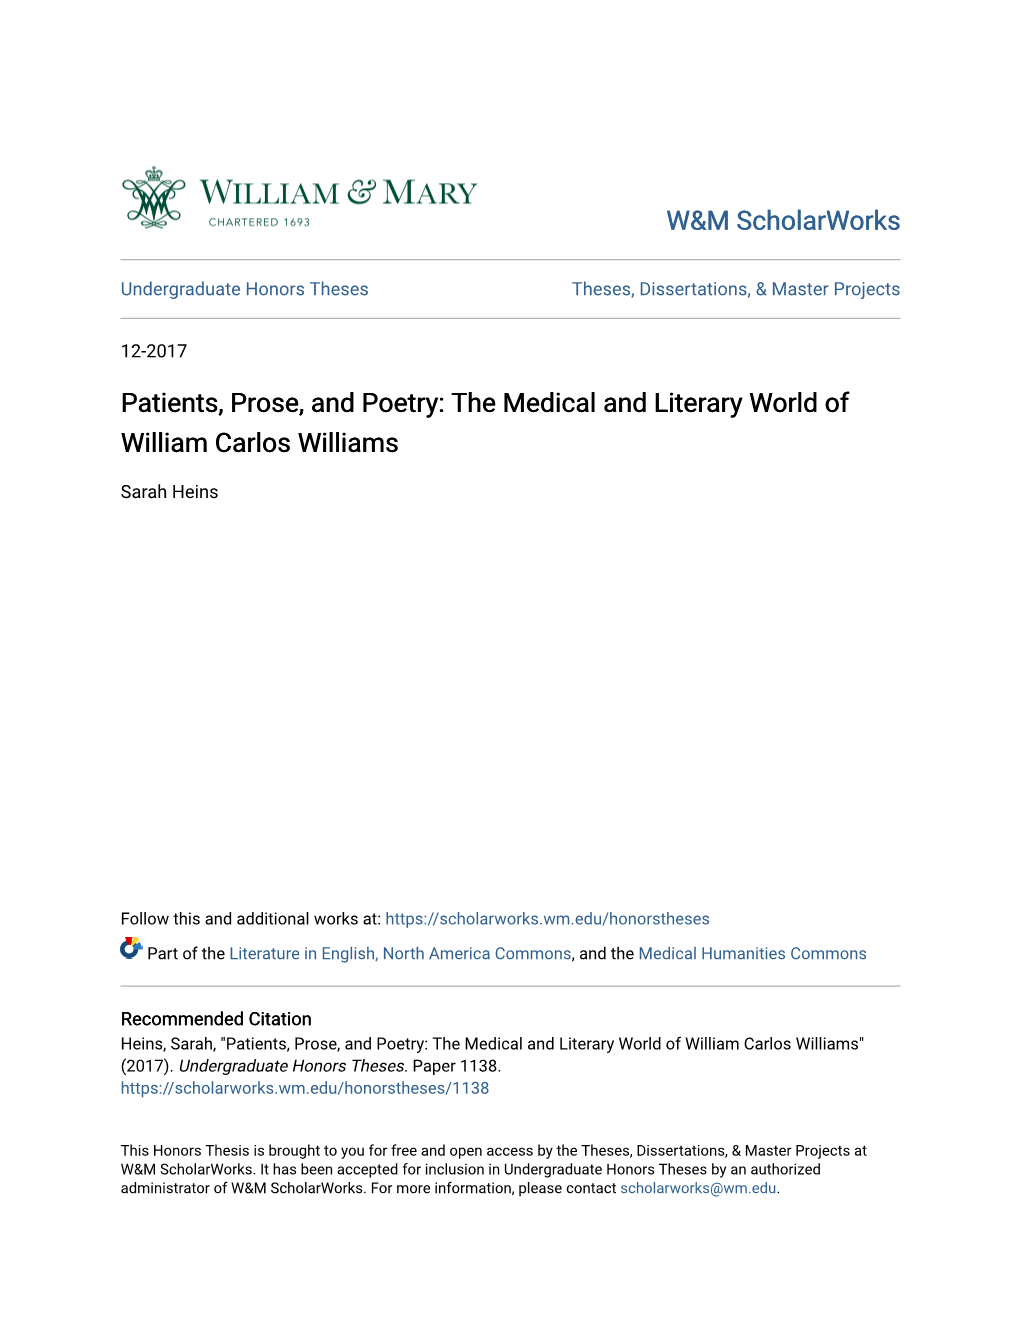 The Medical and Literary World of William Carlos Williams